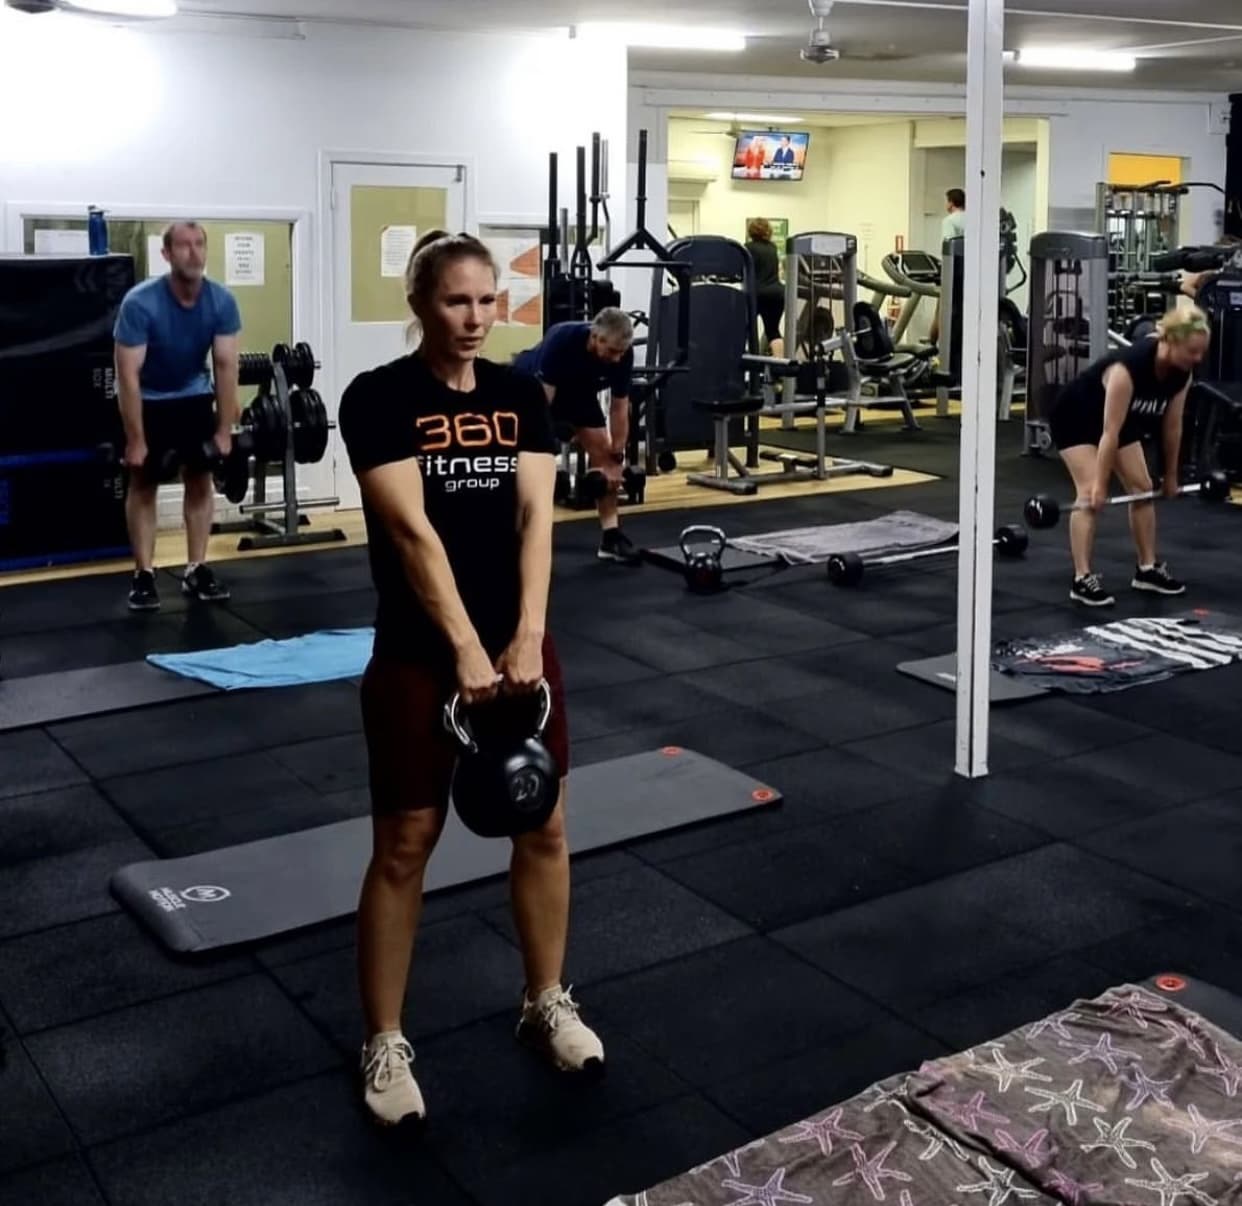 Girl In The Gym — 360 Fitness Group in Cairns, QLD